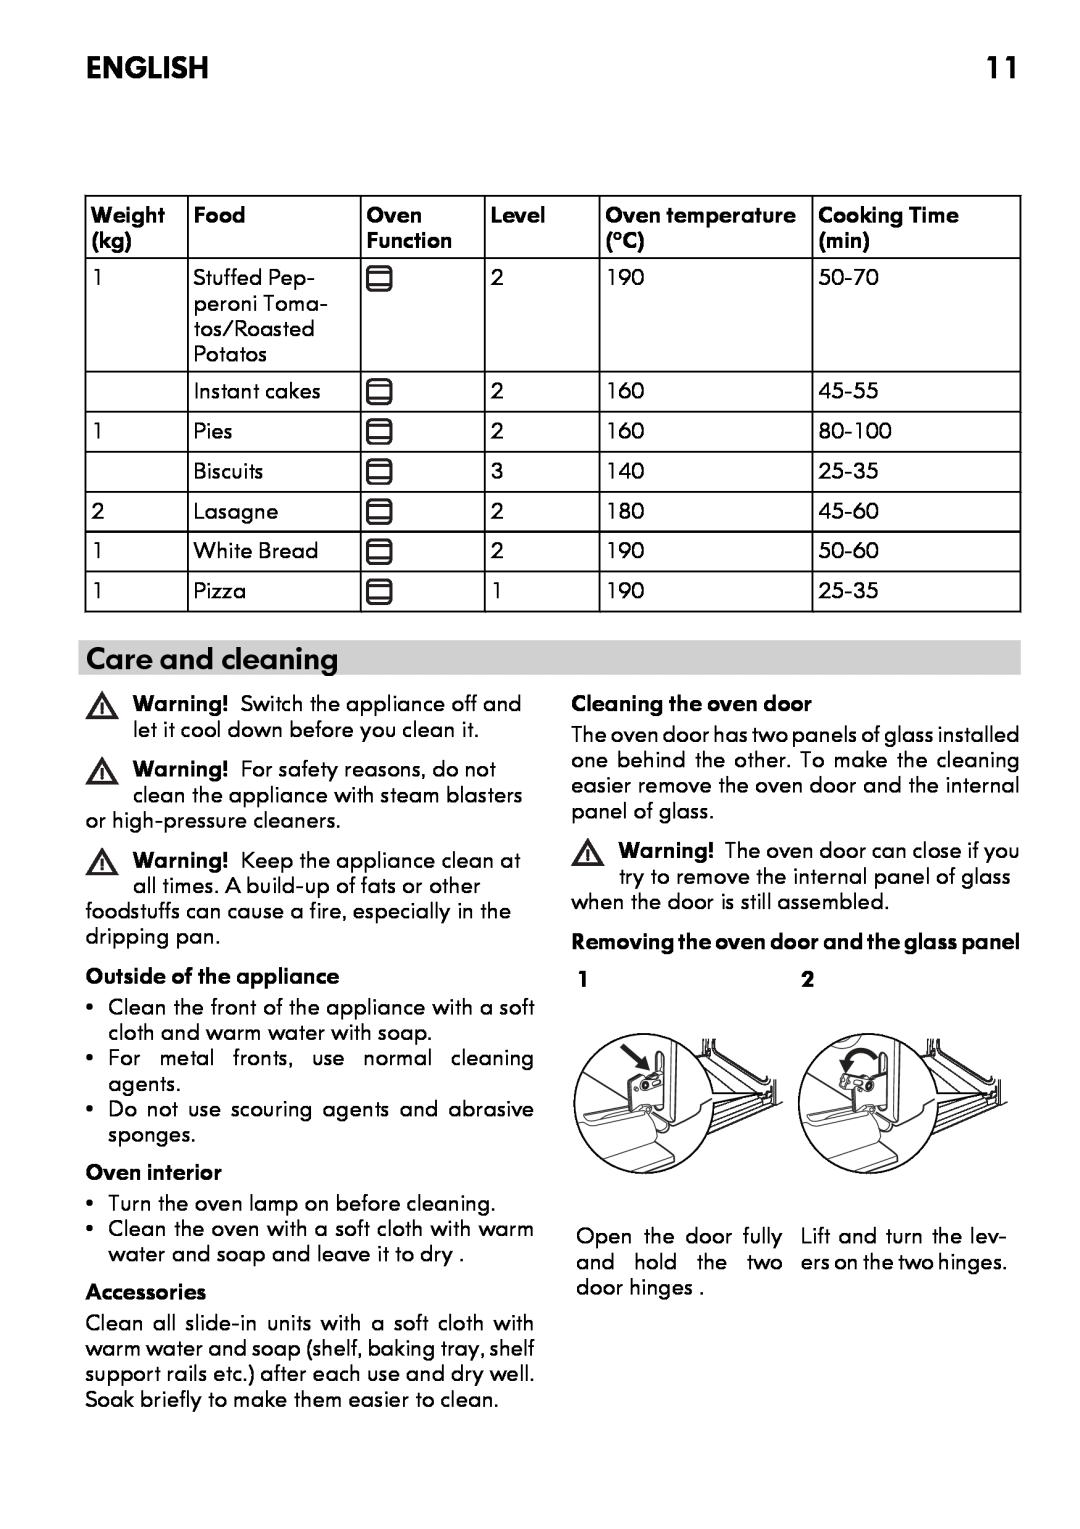 IKEA CG3 manual Care and cleaning, English 